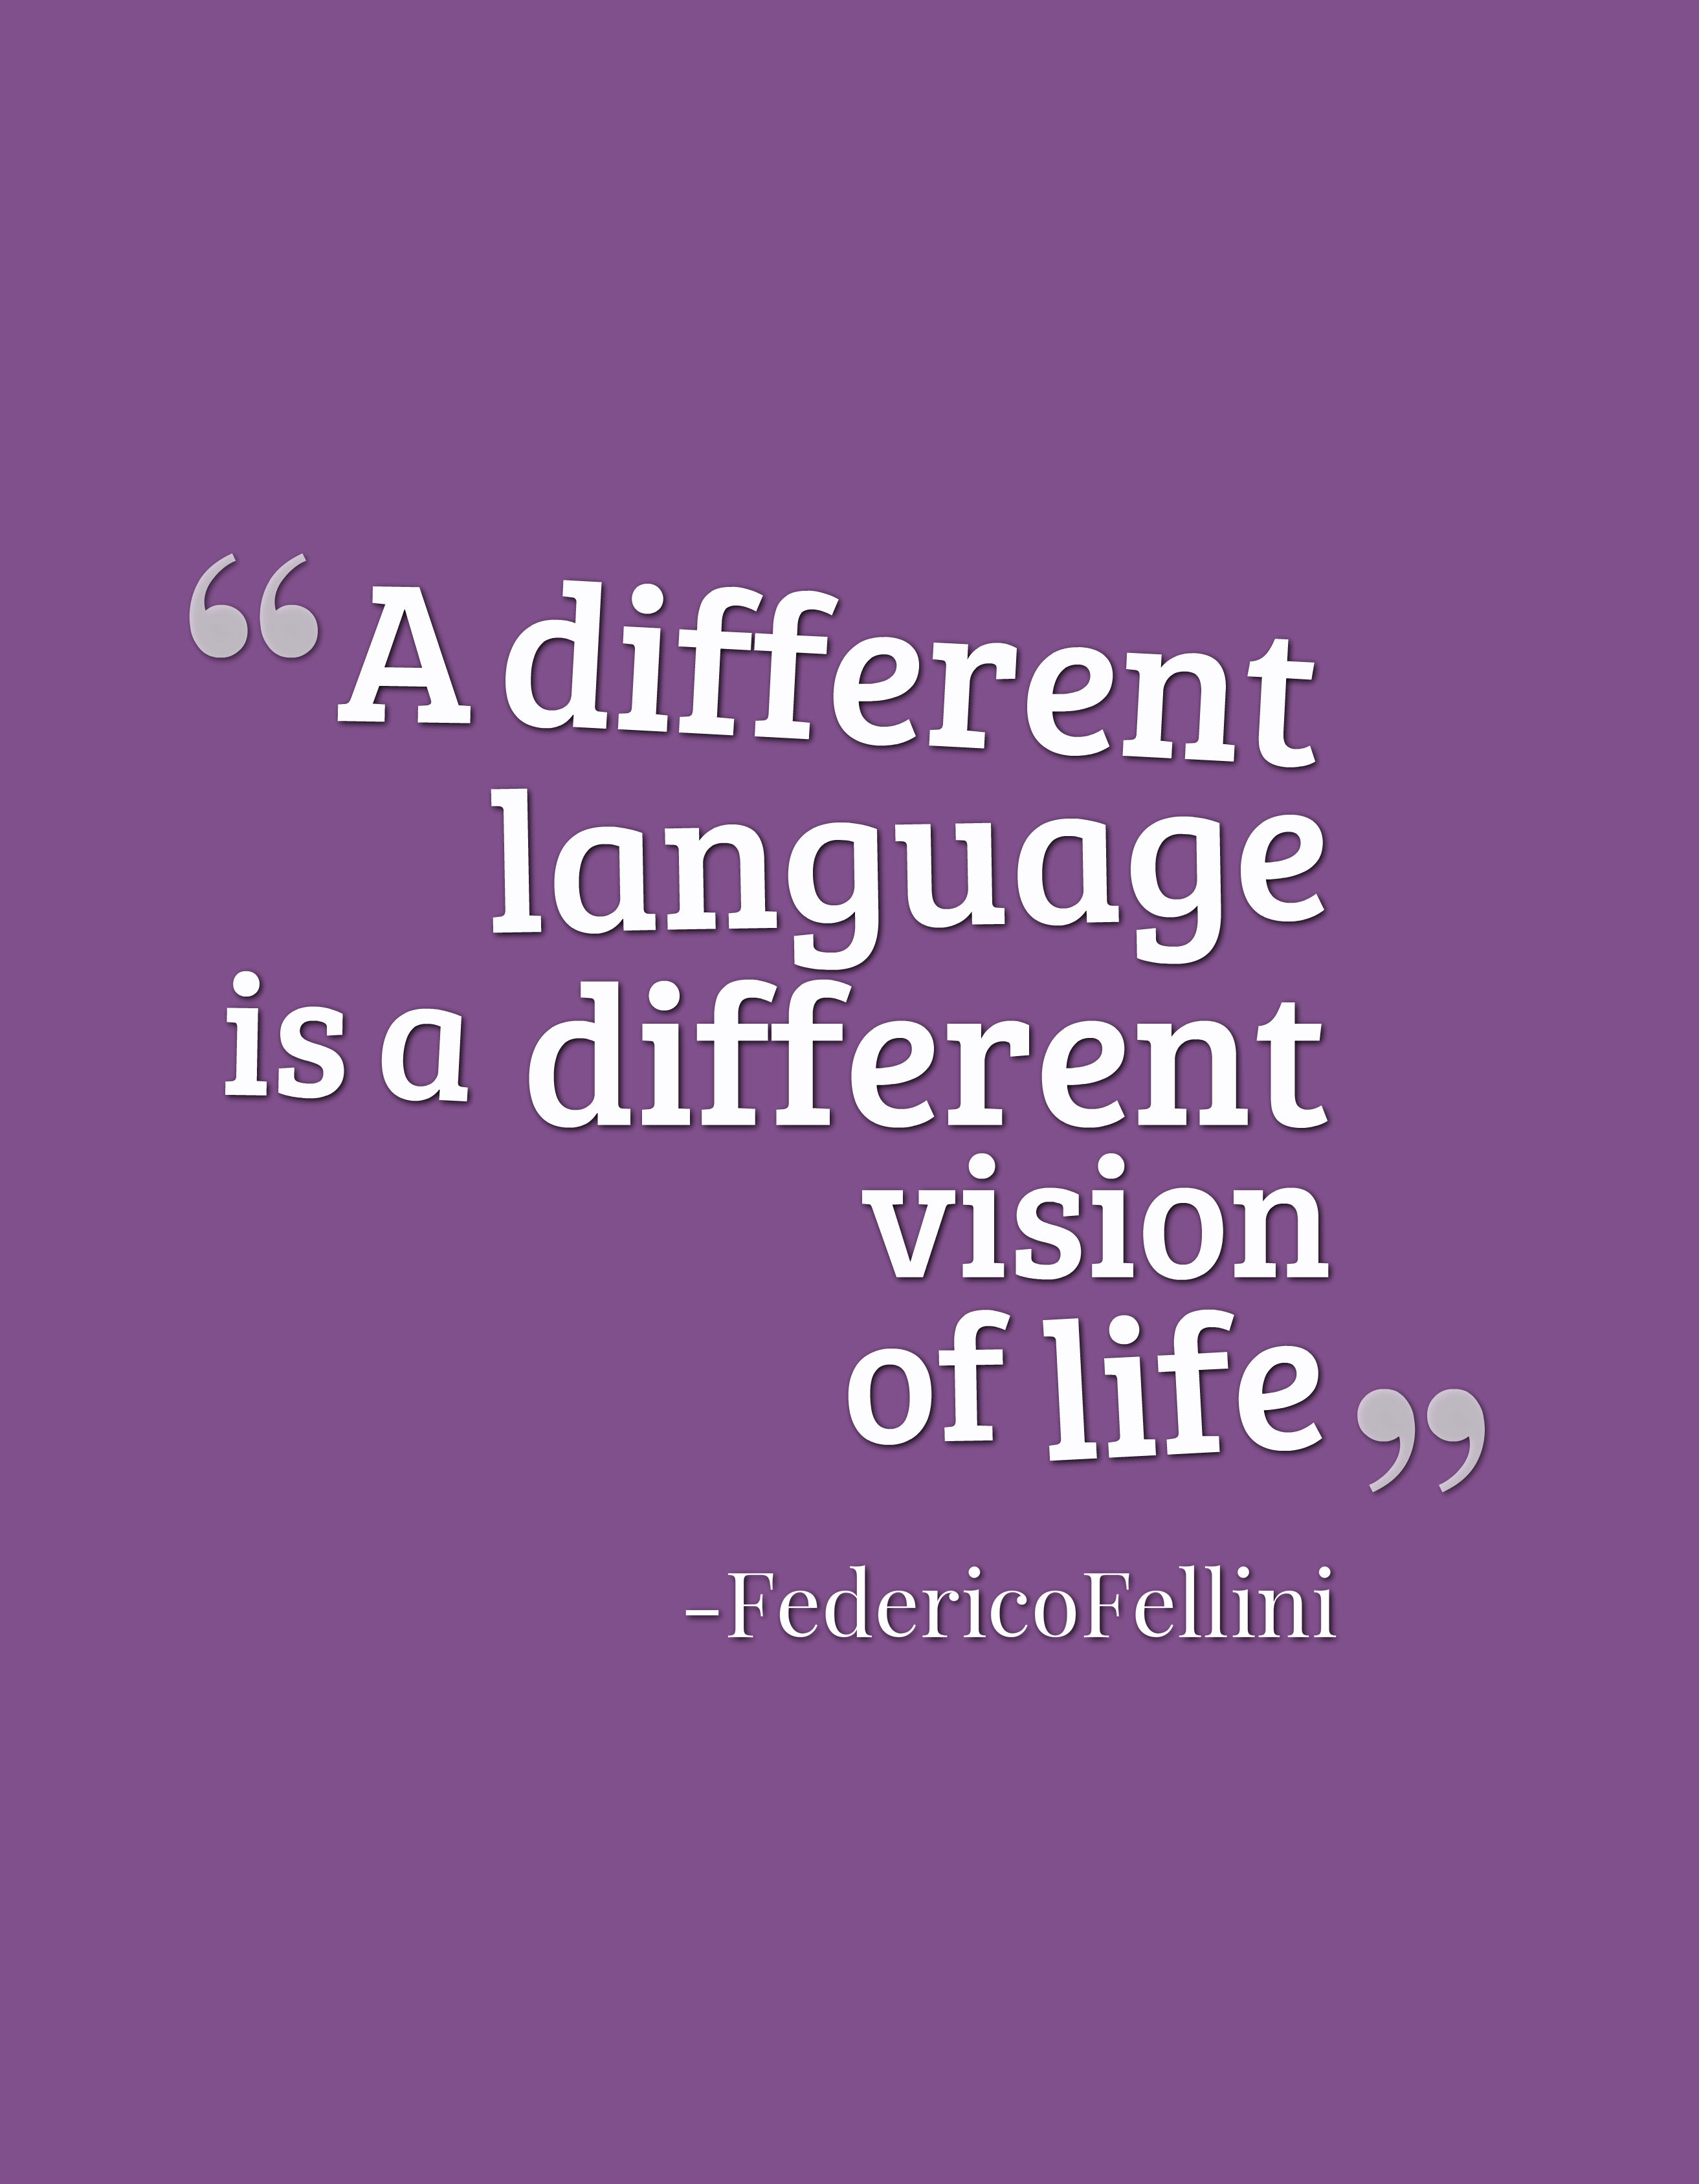 "A different language is a different vision of life." - Federico Fellini